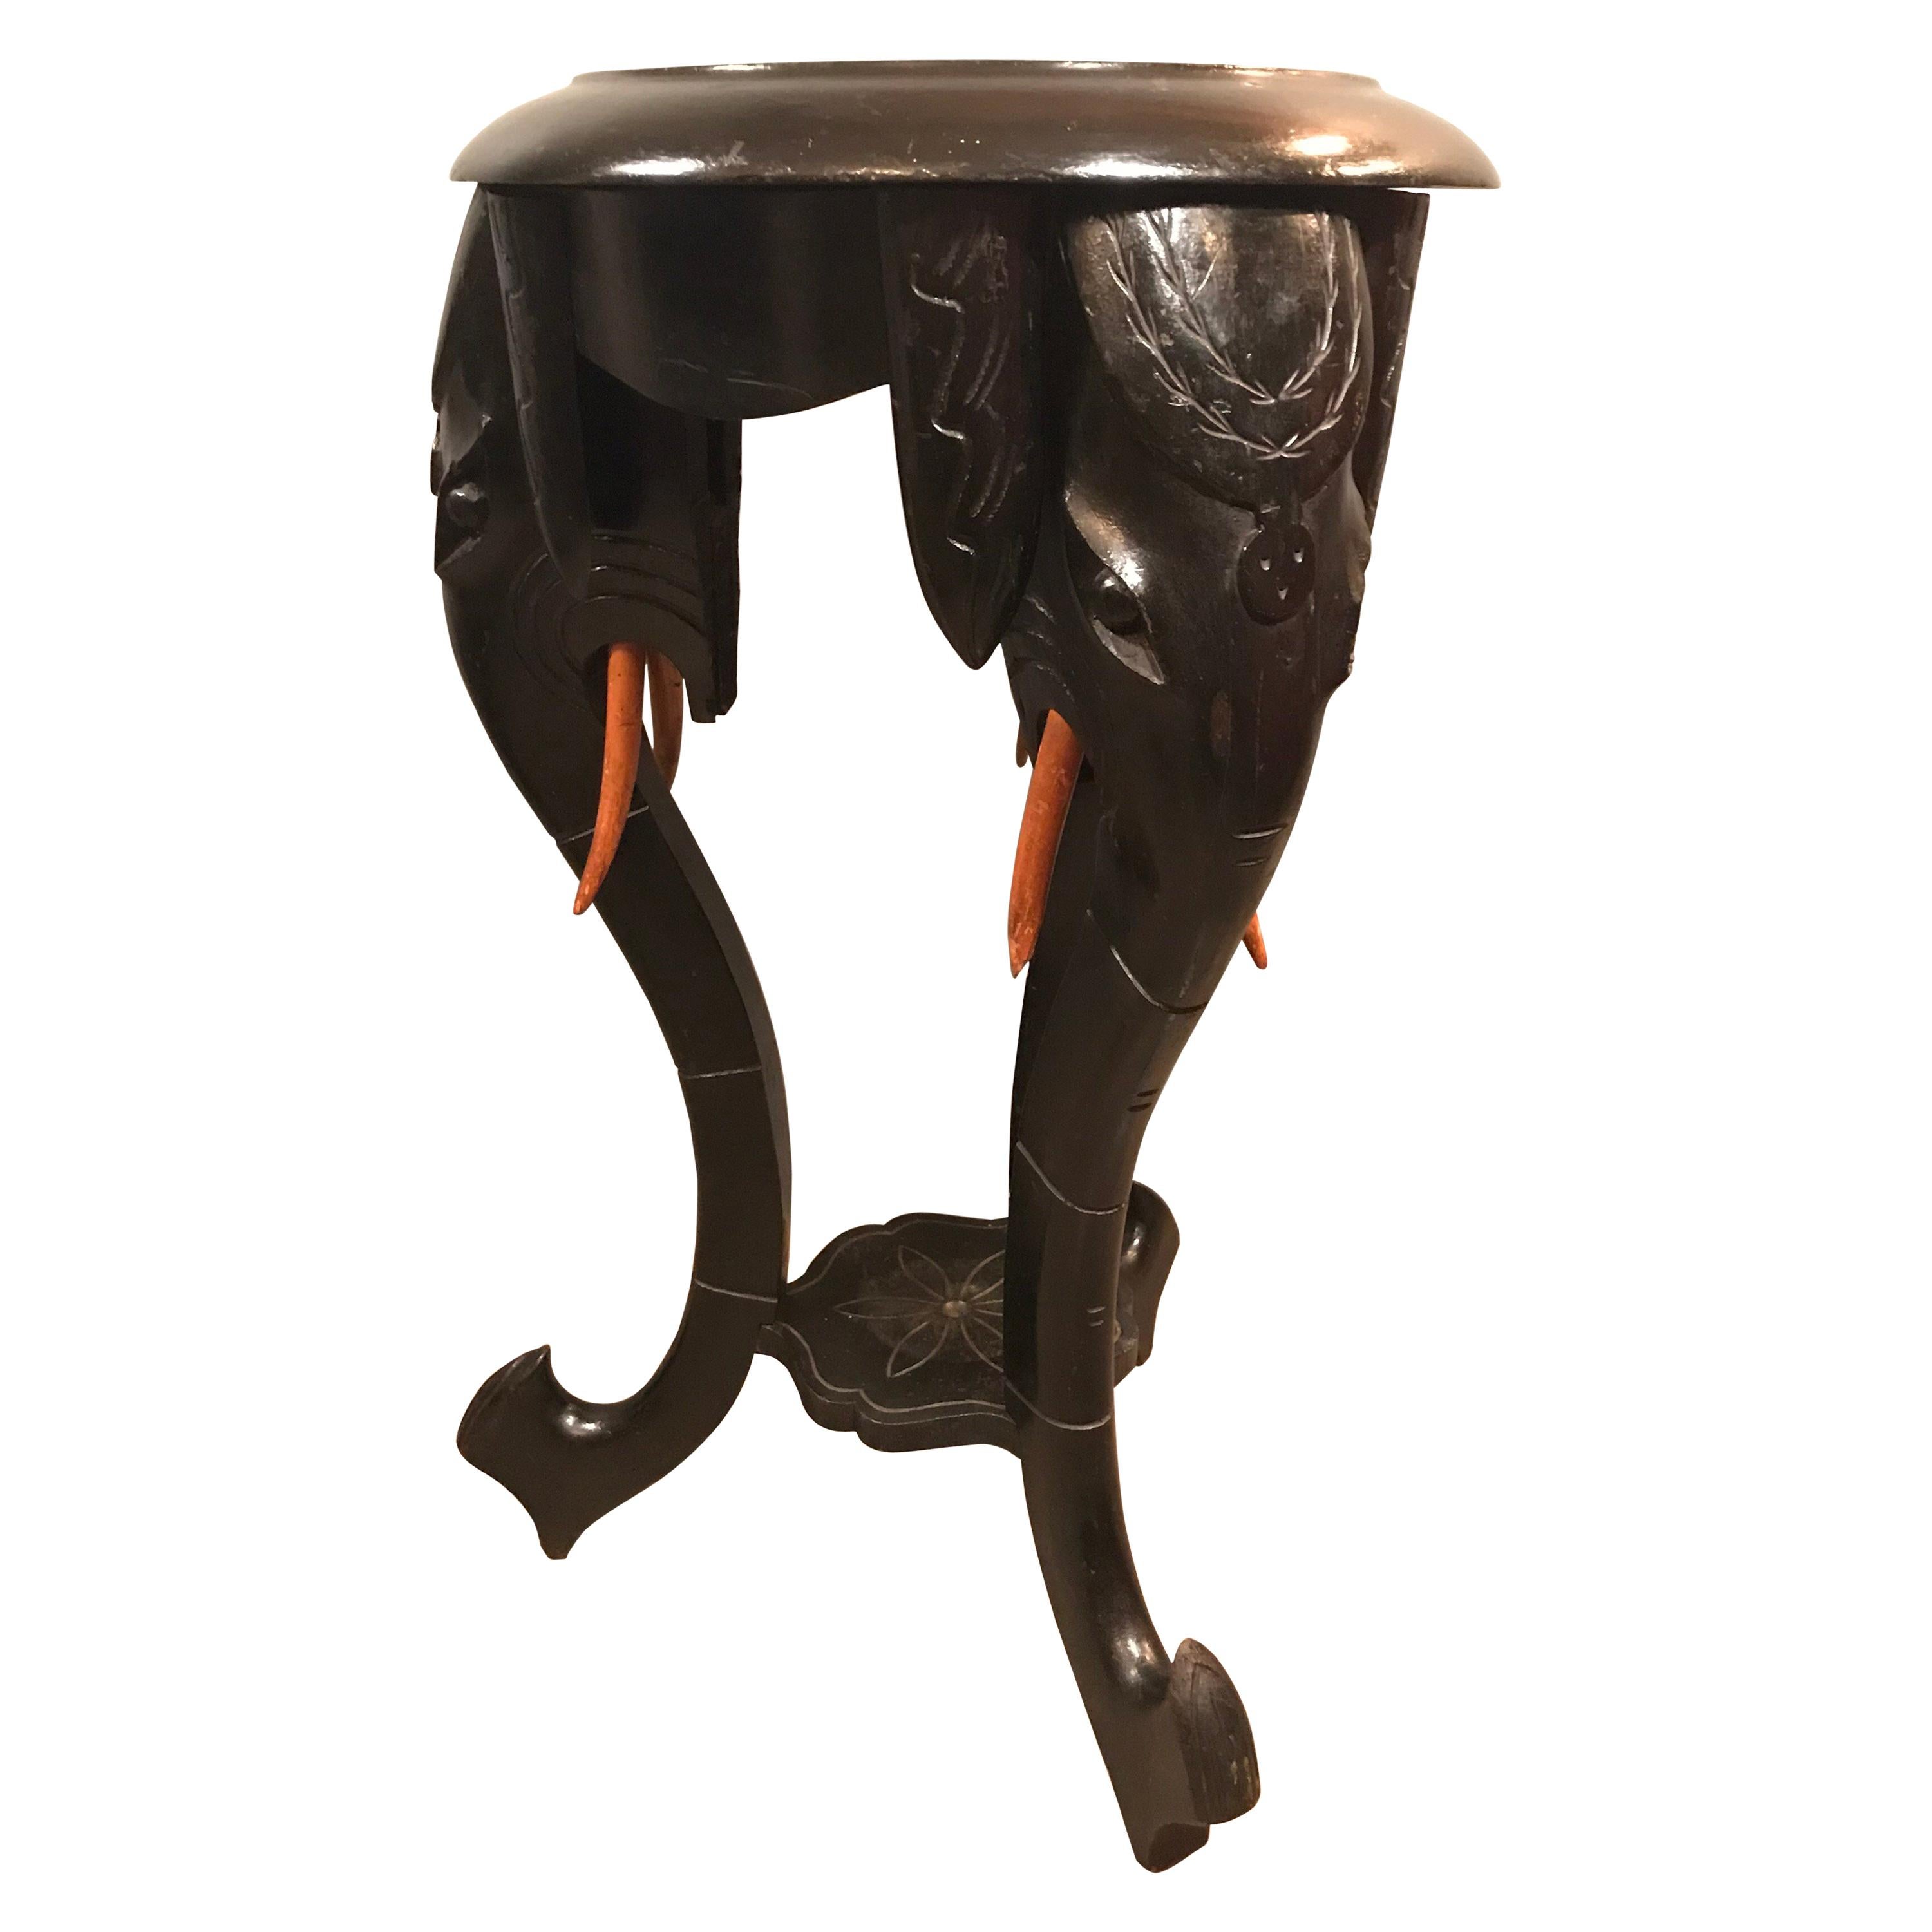 Antique Hand Carved Elephant Side Table from the Early 1900s